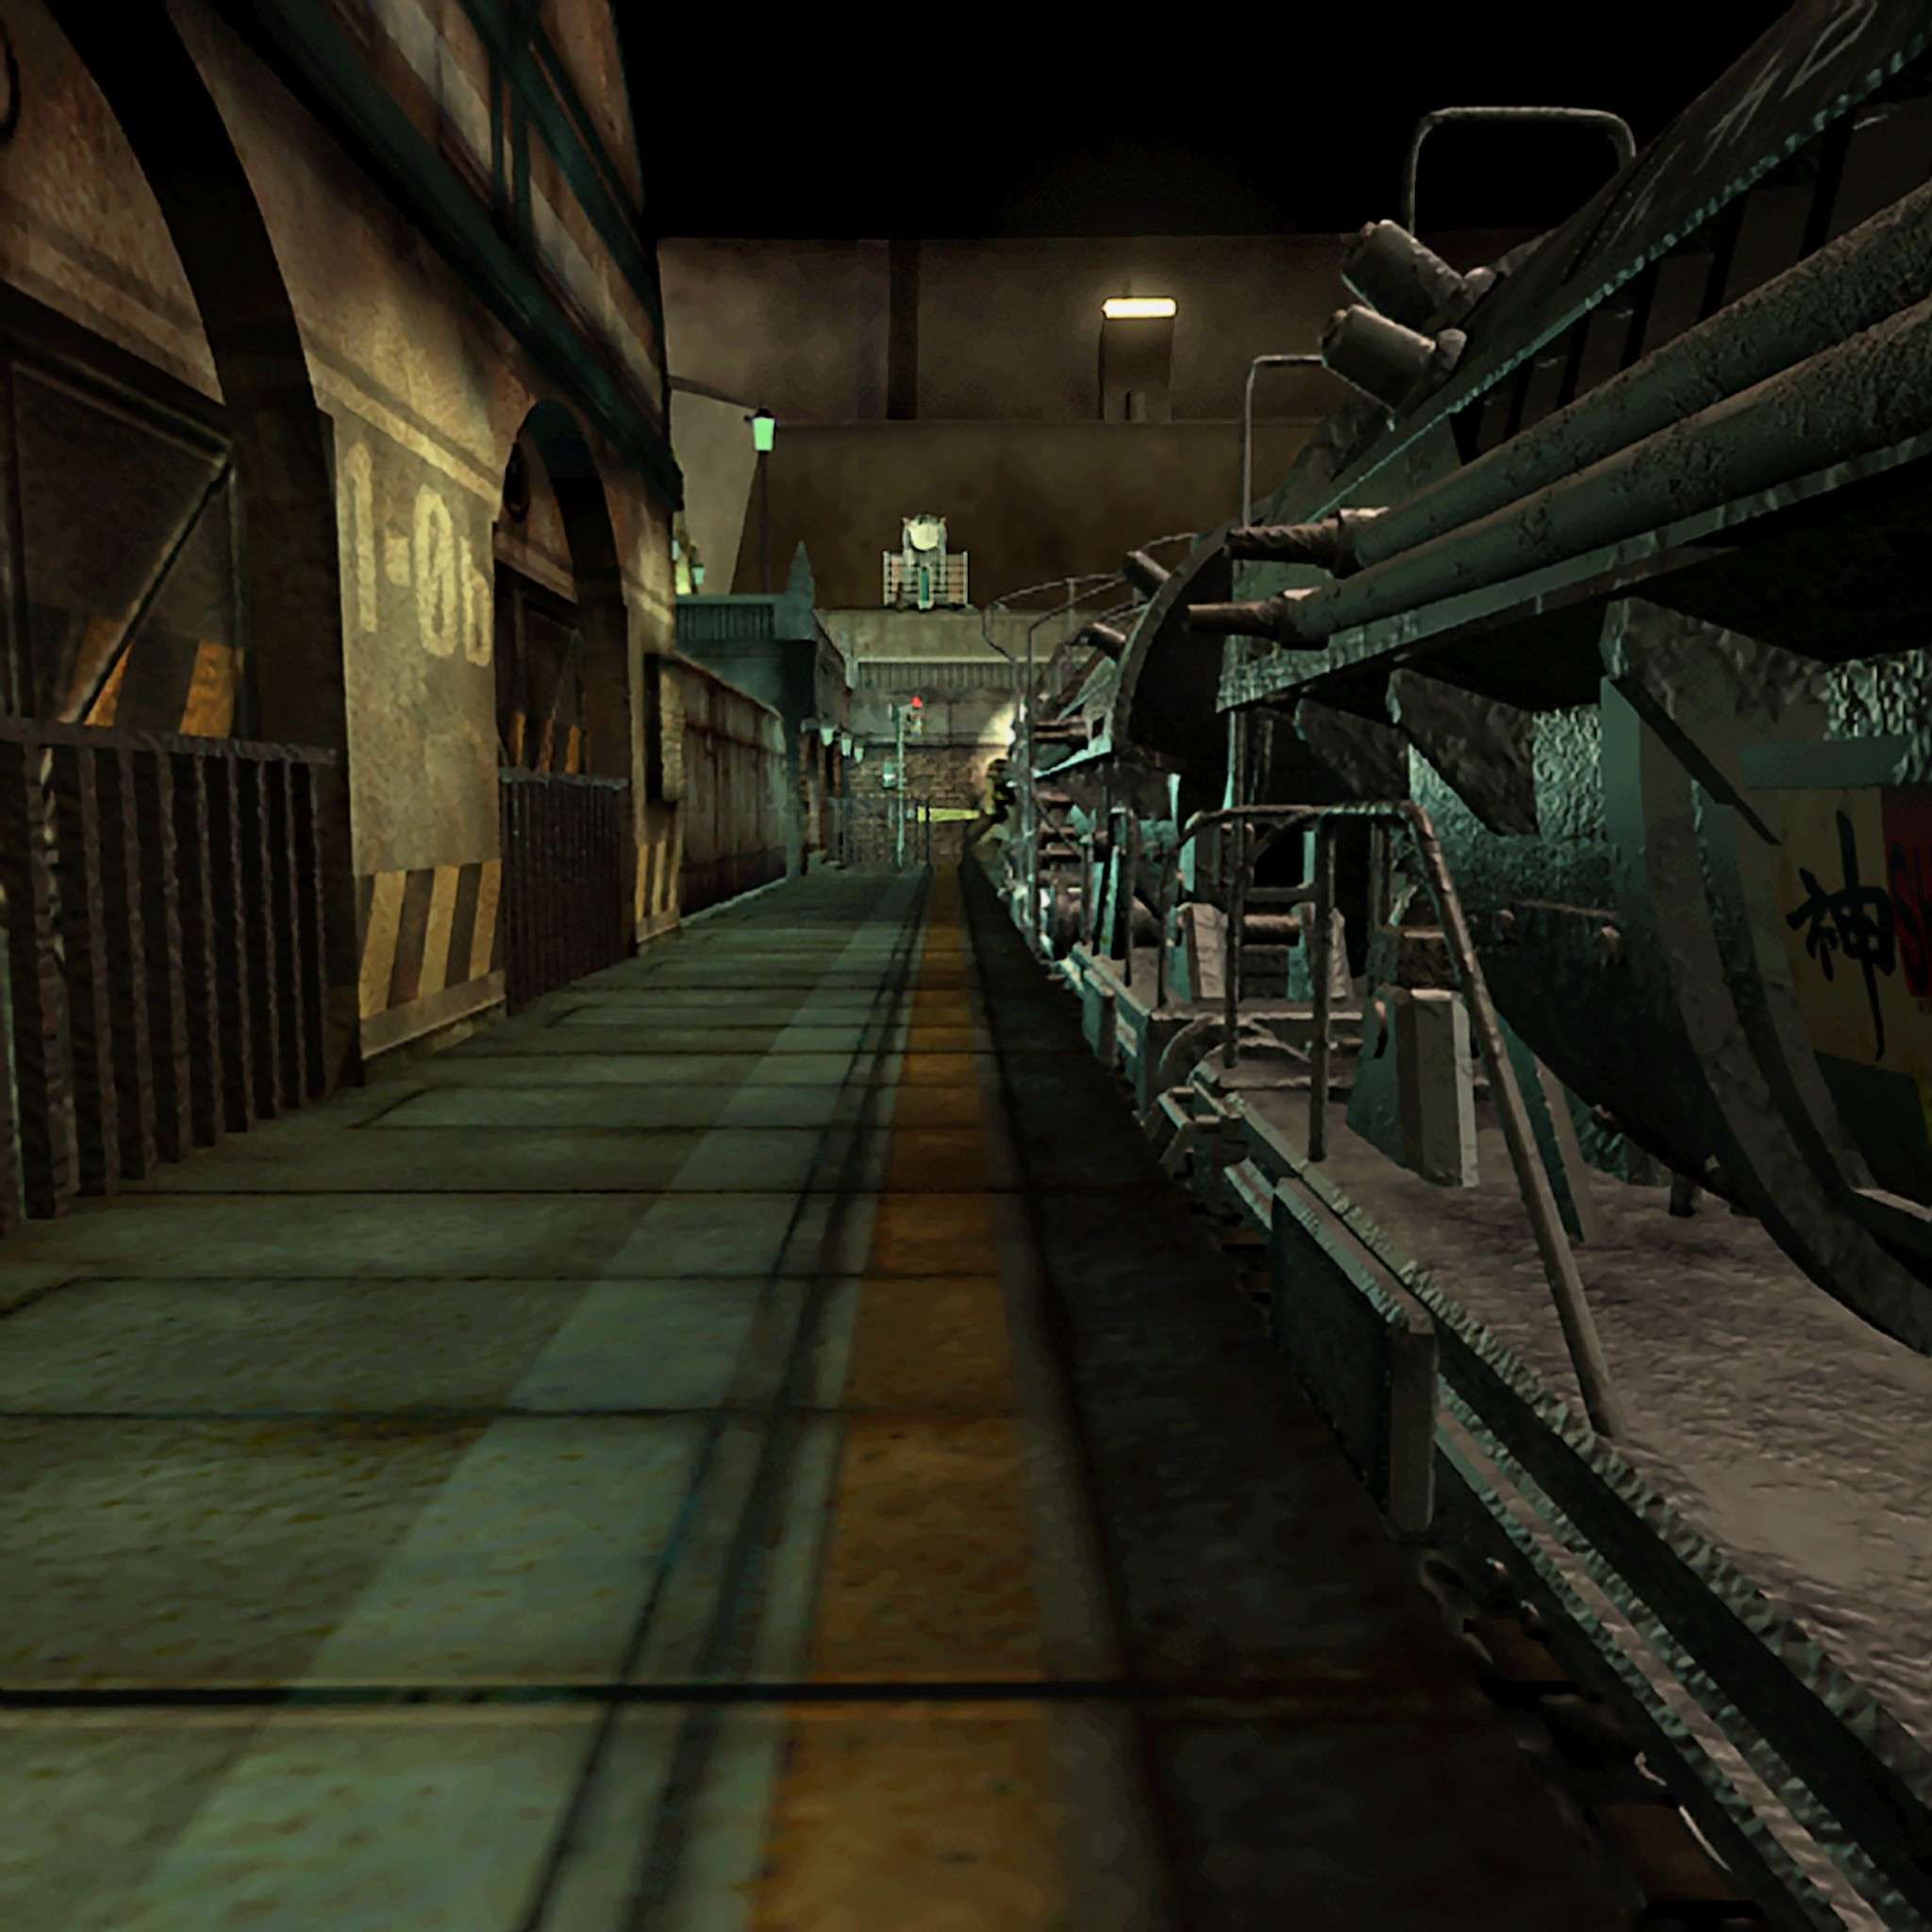 Re: FF7 PSX pre-rendered backgrounds to replacing the ones of FF7 PC versio...